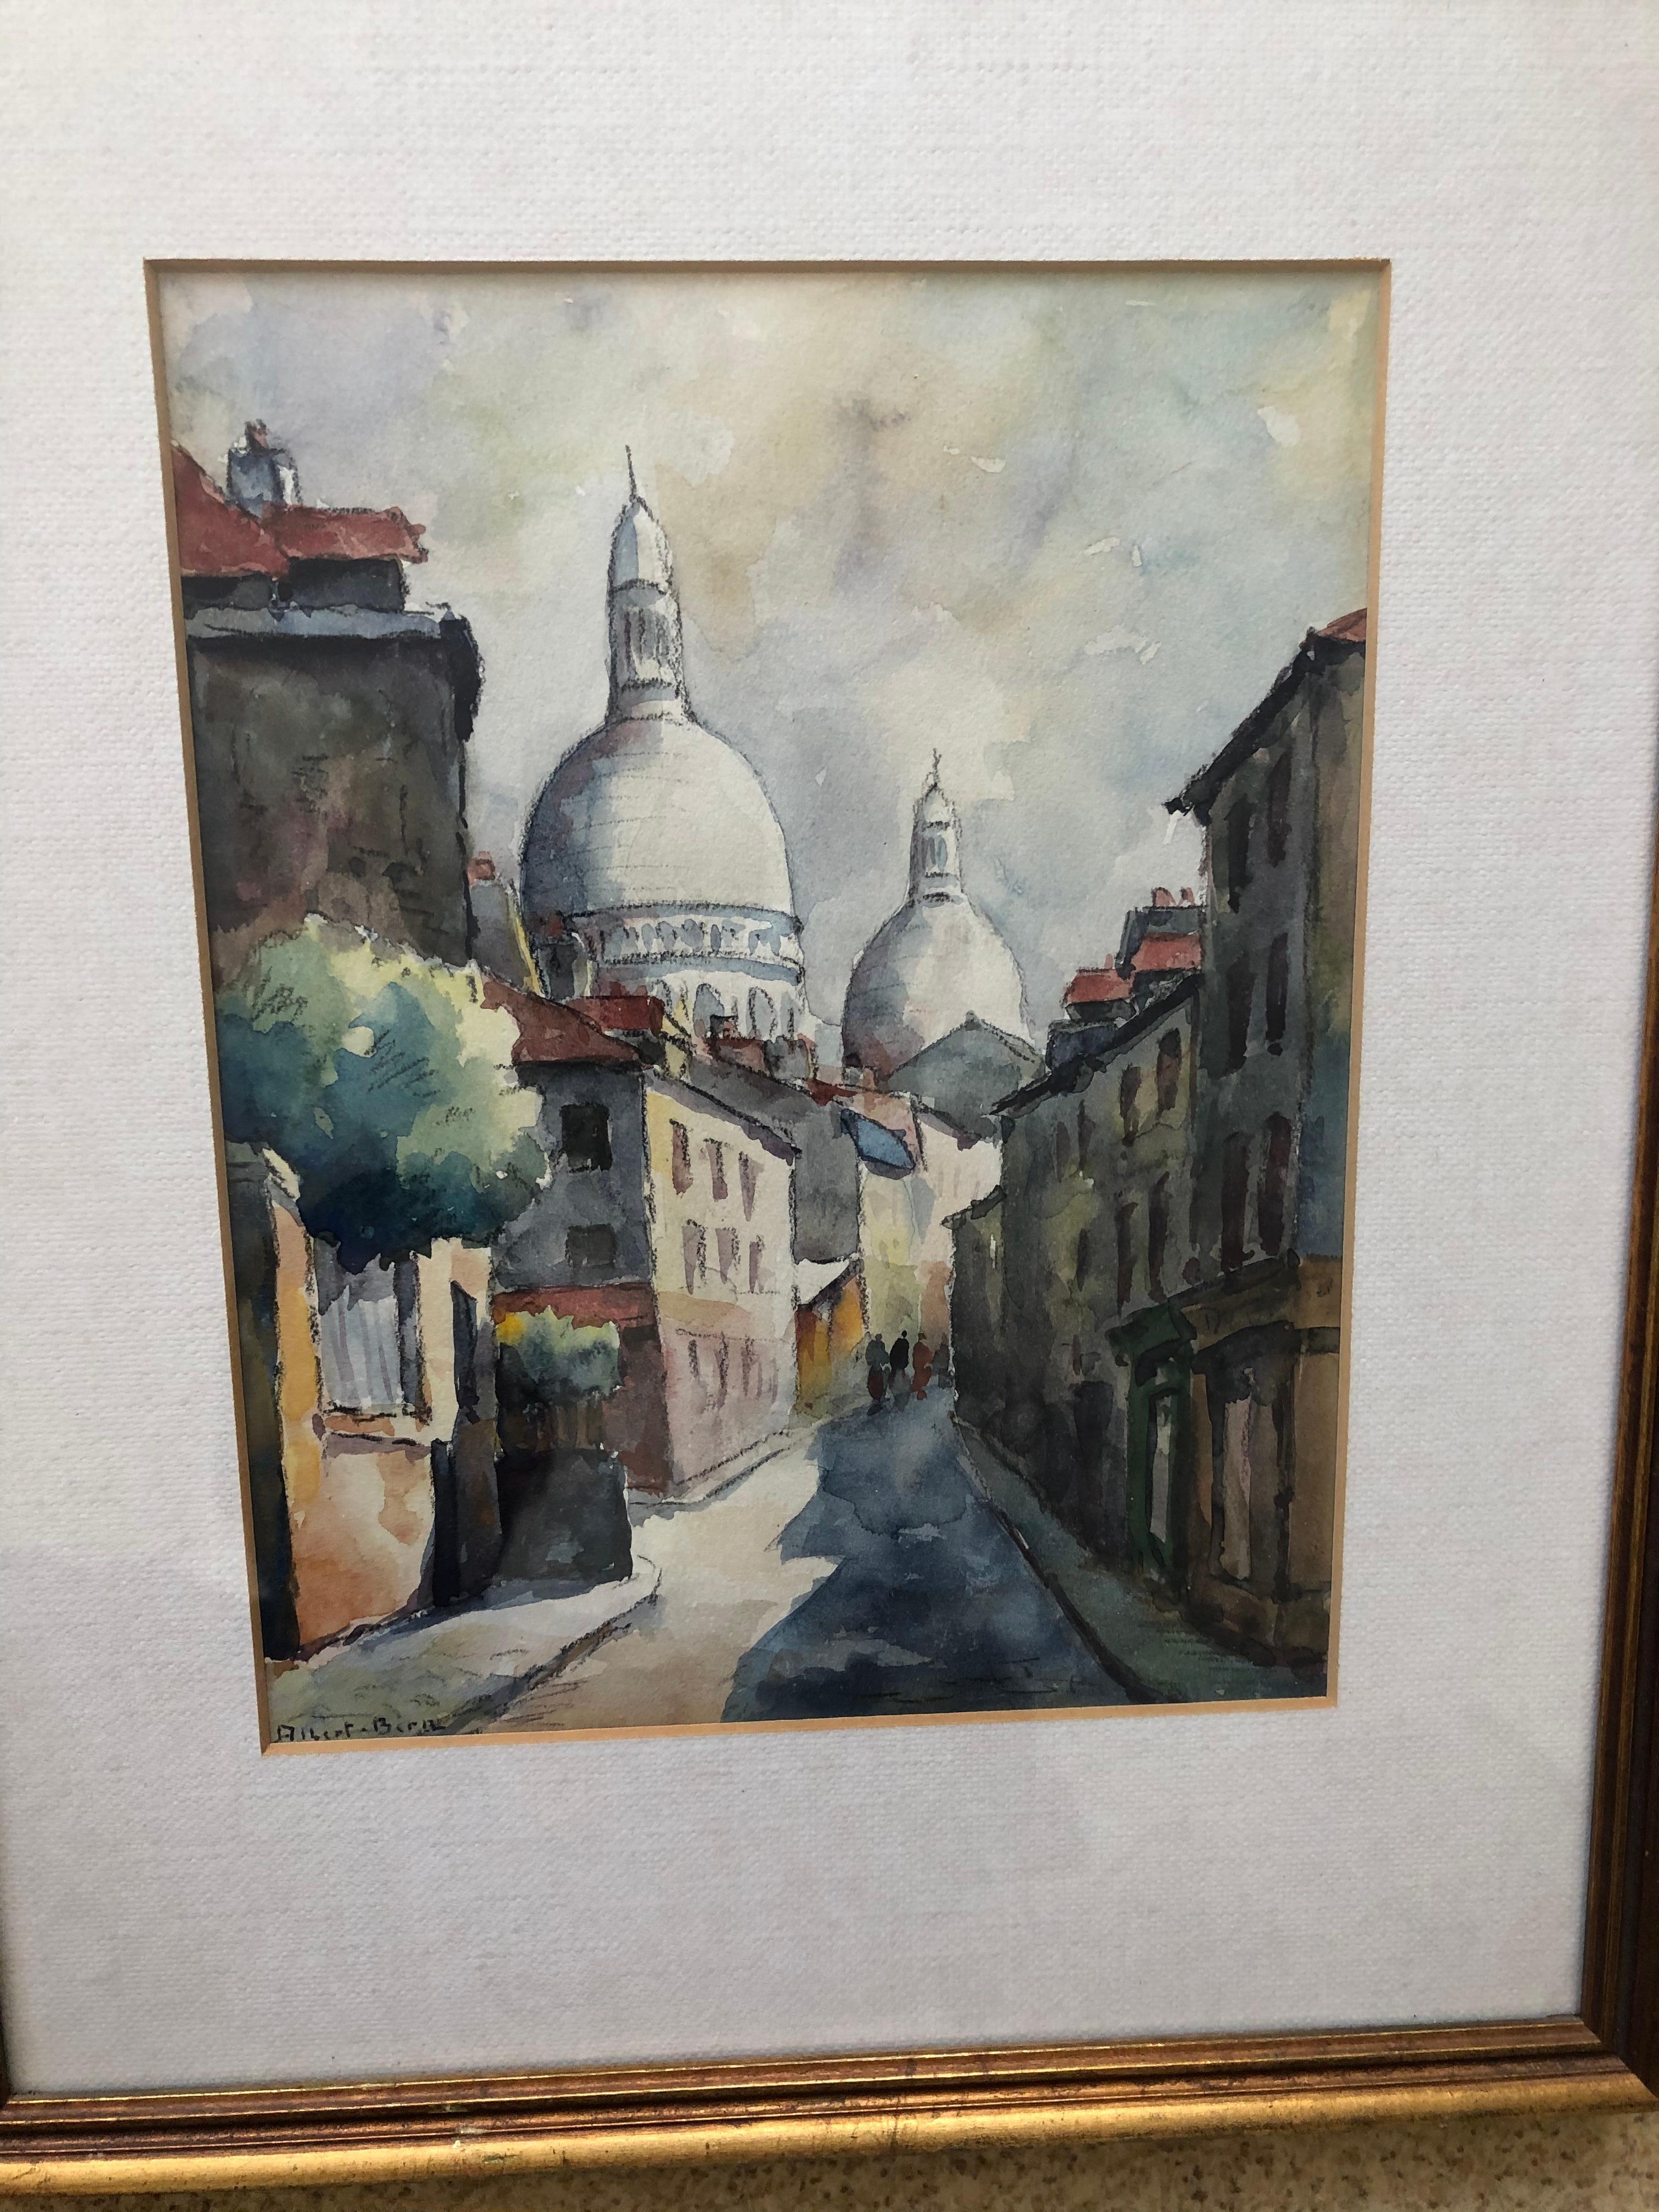 Albert Bern was a French artist born in 1898. He has auction results over $600. This charming watercolor of a French side street measures 9 inches wide by 7 high. The frame measures 14 inches high by 11 1/2 high. It is also beautifully custom matted.